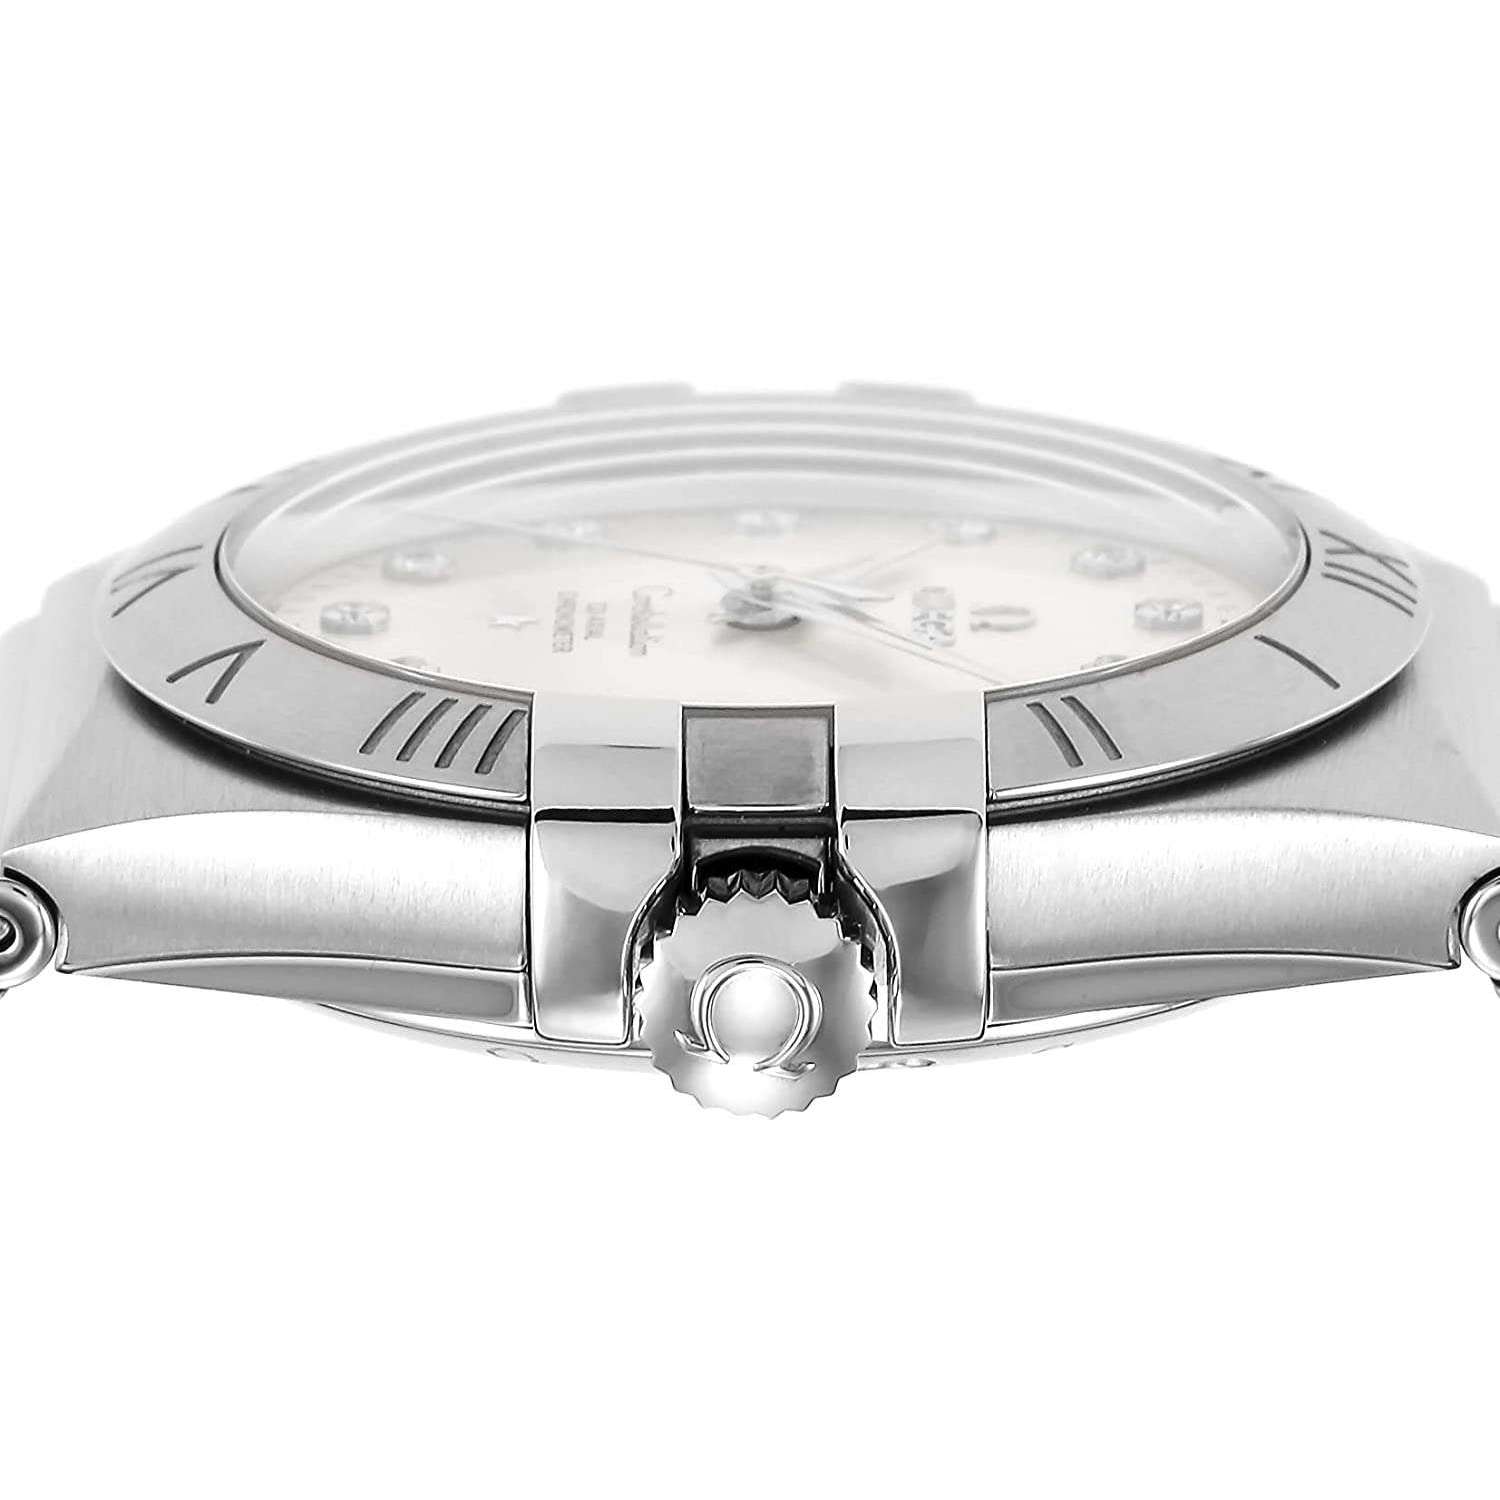 ROOK JAPAN:OMEGA CONSTELLATION CO-AXIAL CHONOMETER 34 MM MEN WATCH 123.10.35.20.52.001,Luxury Watch,Omega